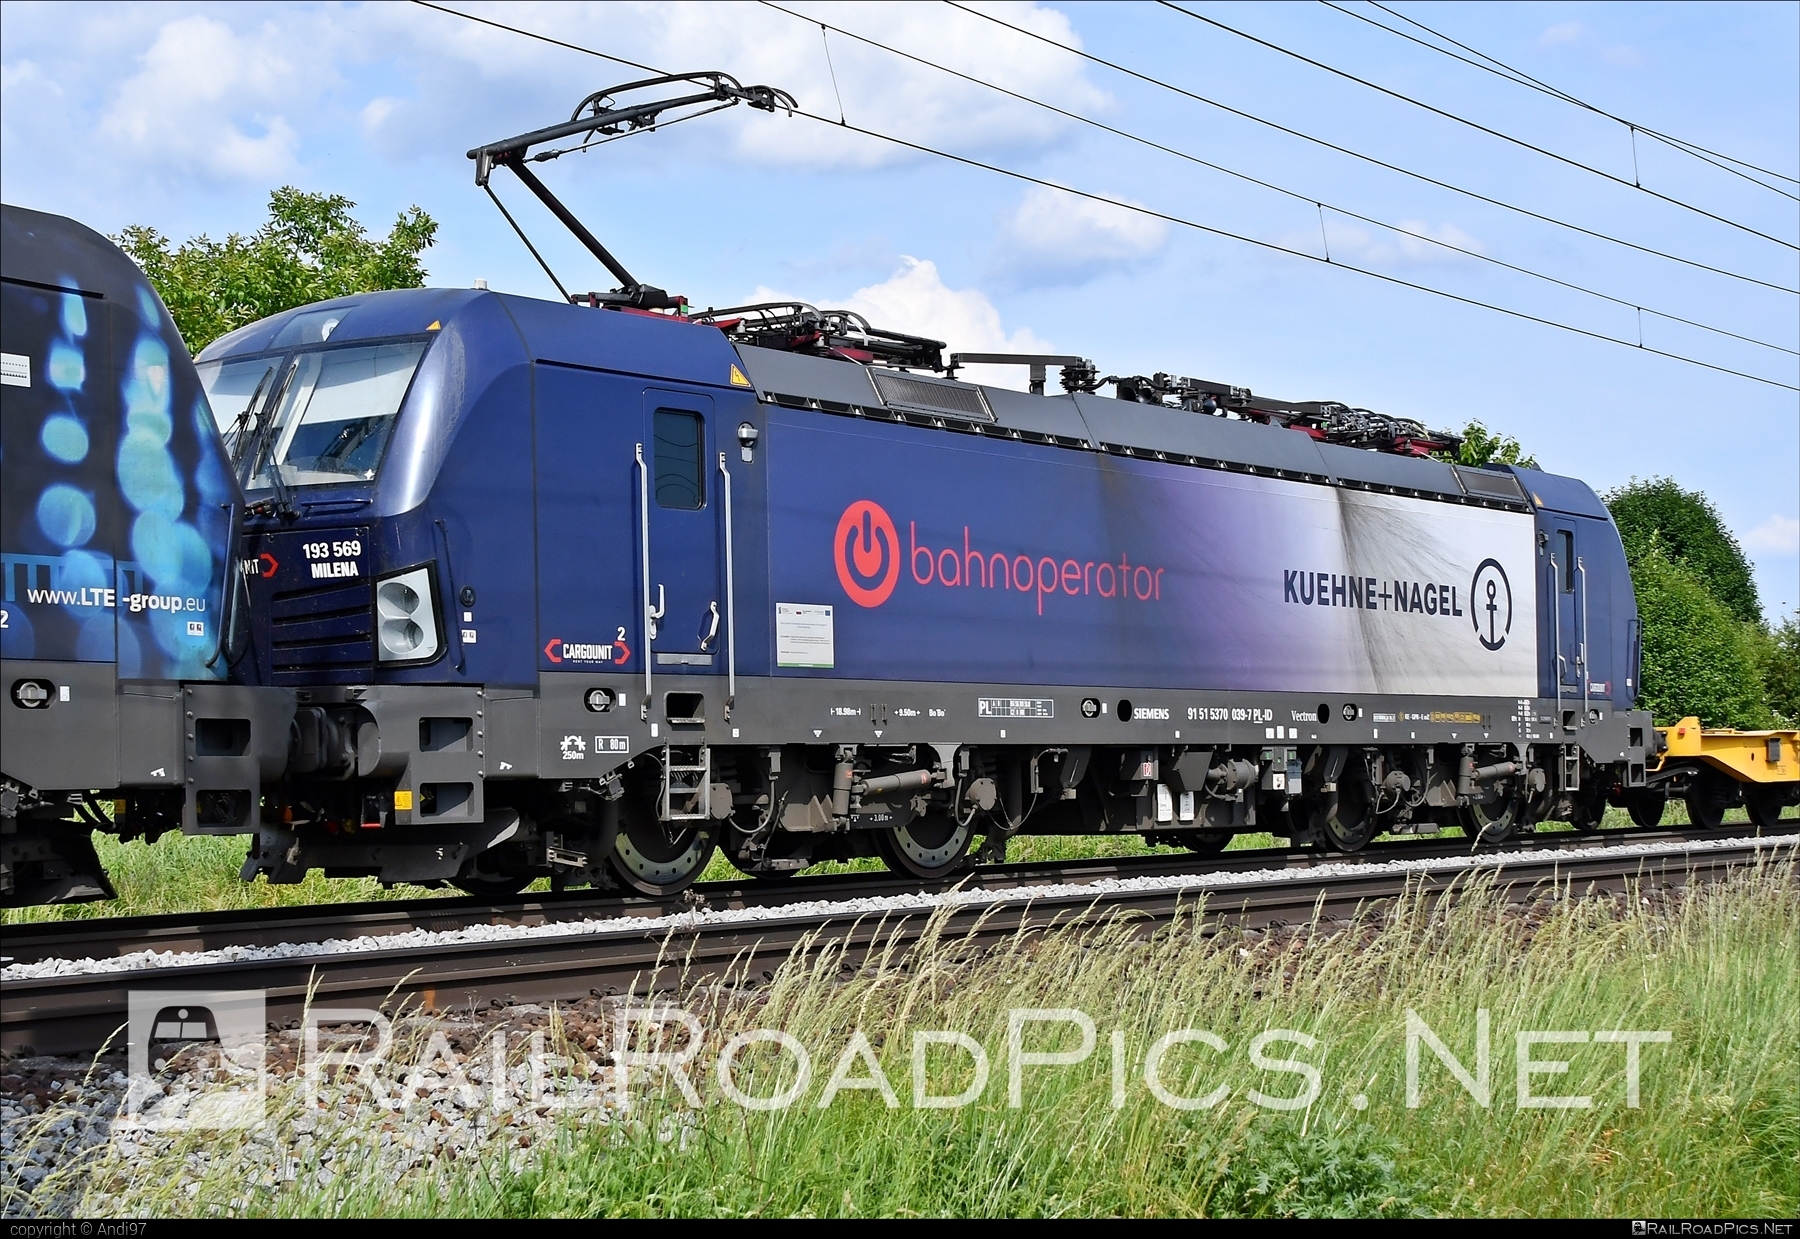 Siemens Vectron MS - 5 370 039-7 operated by LTE Logistik und Transport GmbH #IndustrialDivision #bahnoperator #lte #ltelogistikundtransport #ltelogistikundtransportgmbh #siemens #siemensVectron #siemensVectronMS #vectron #vectronMS